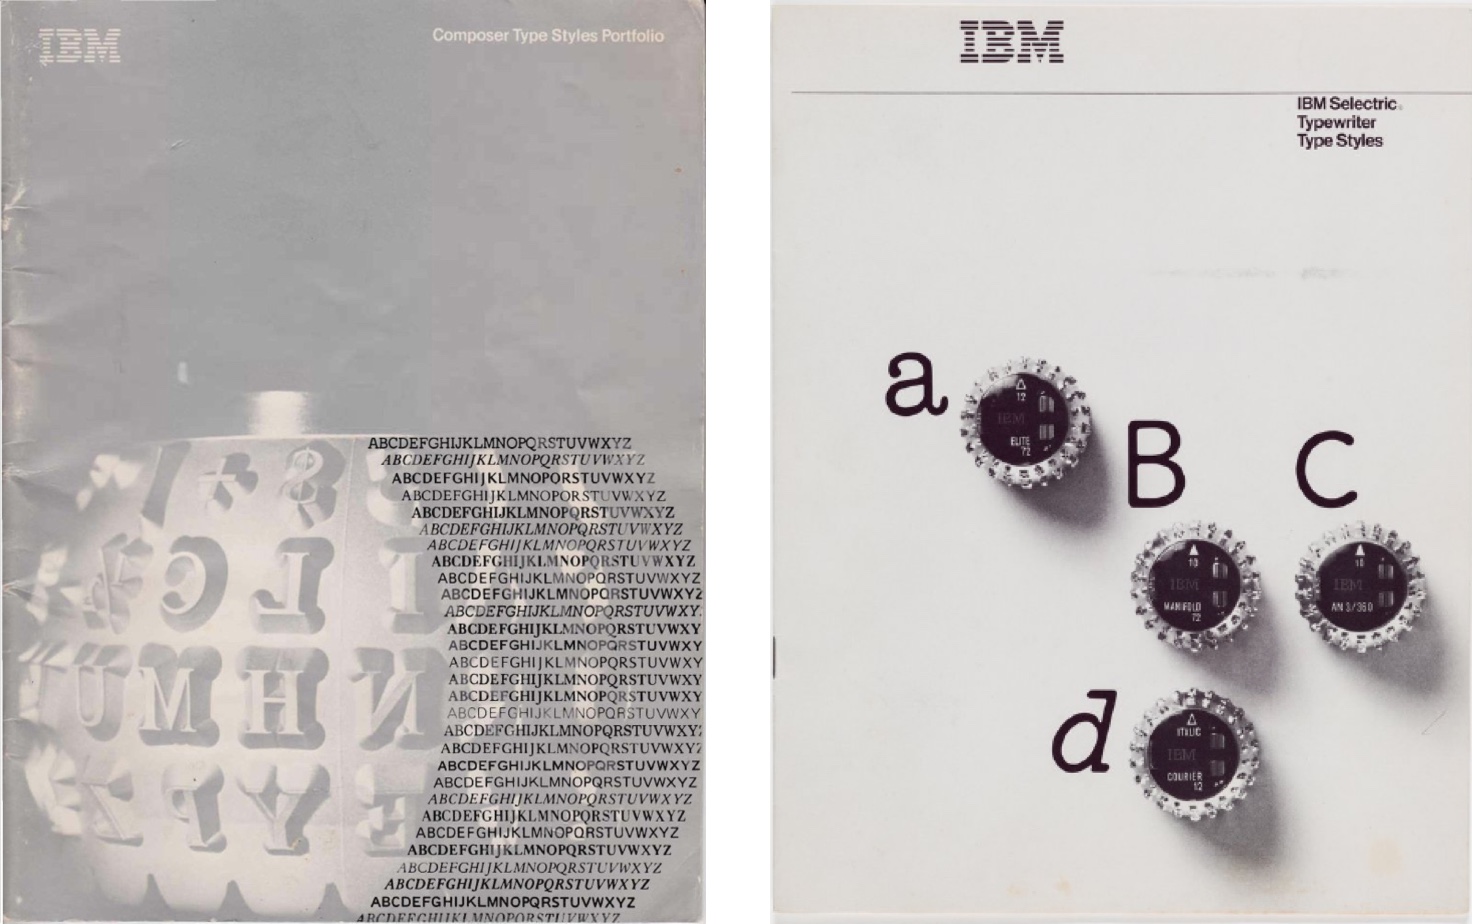 [↑] Selectric “golf ball” catalog: Long before uploading fonts into a type manager, IBM printed physical catalogs for Selectric’s interchangeable type “golf balls.”